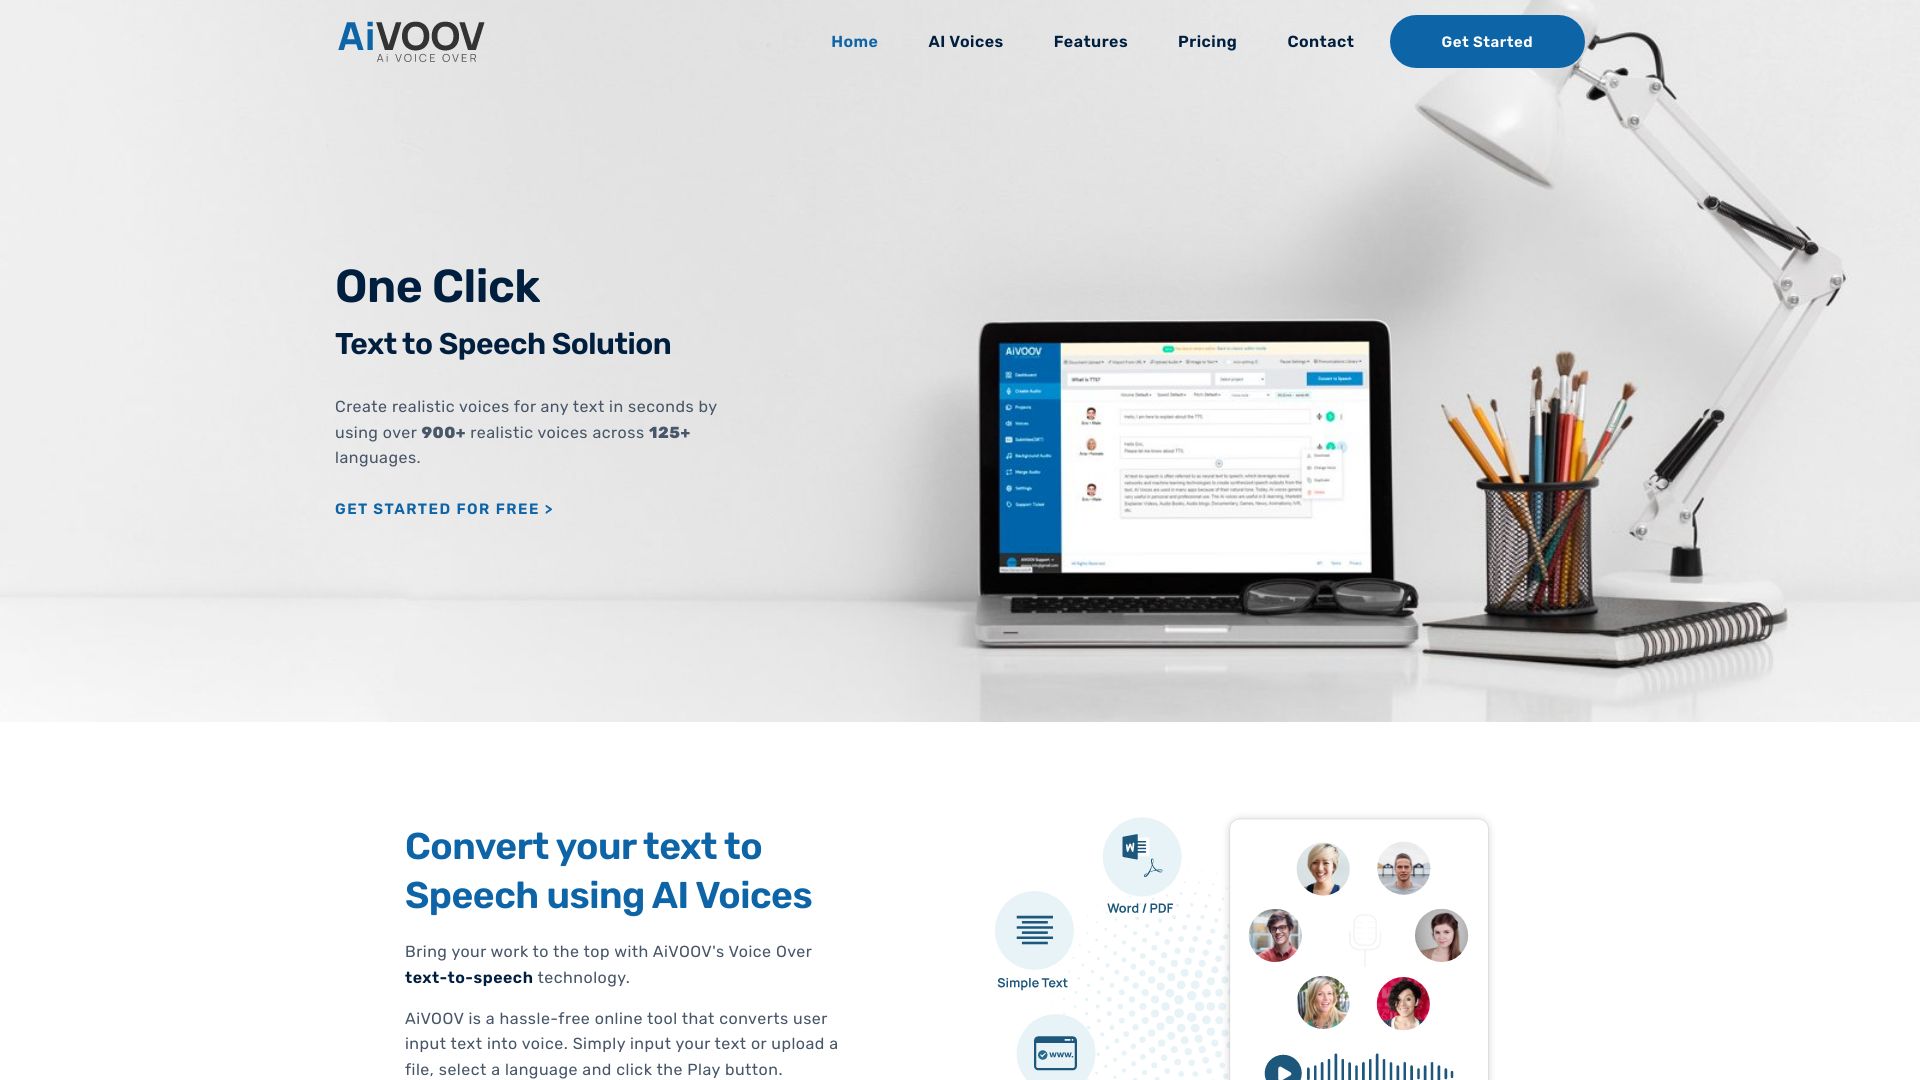 AiVOOV - Text to Speech Solution